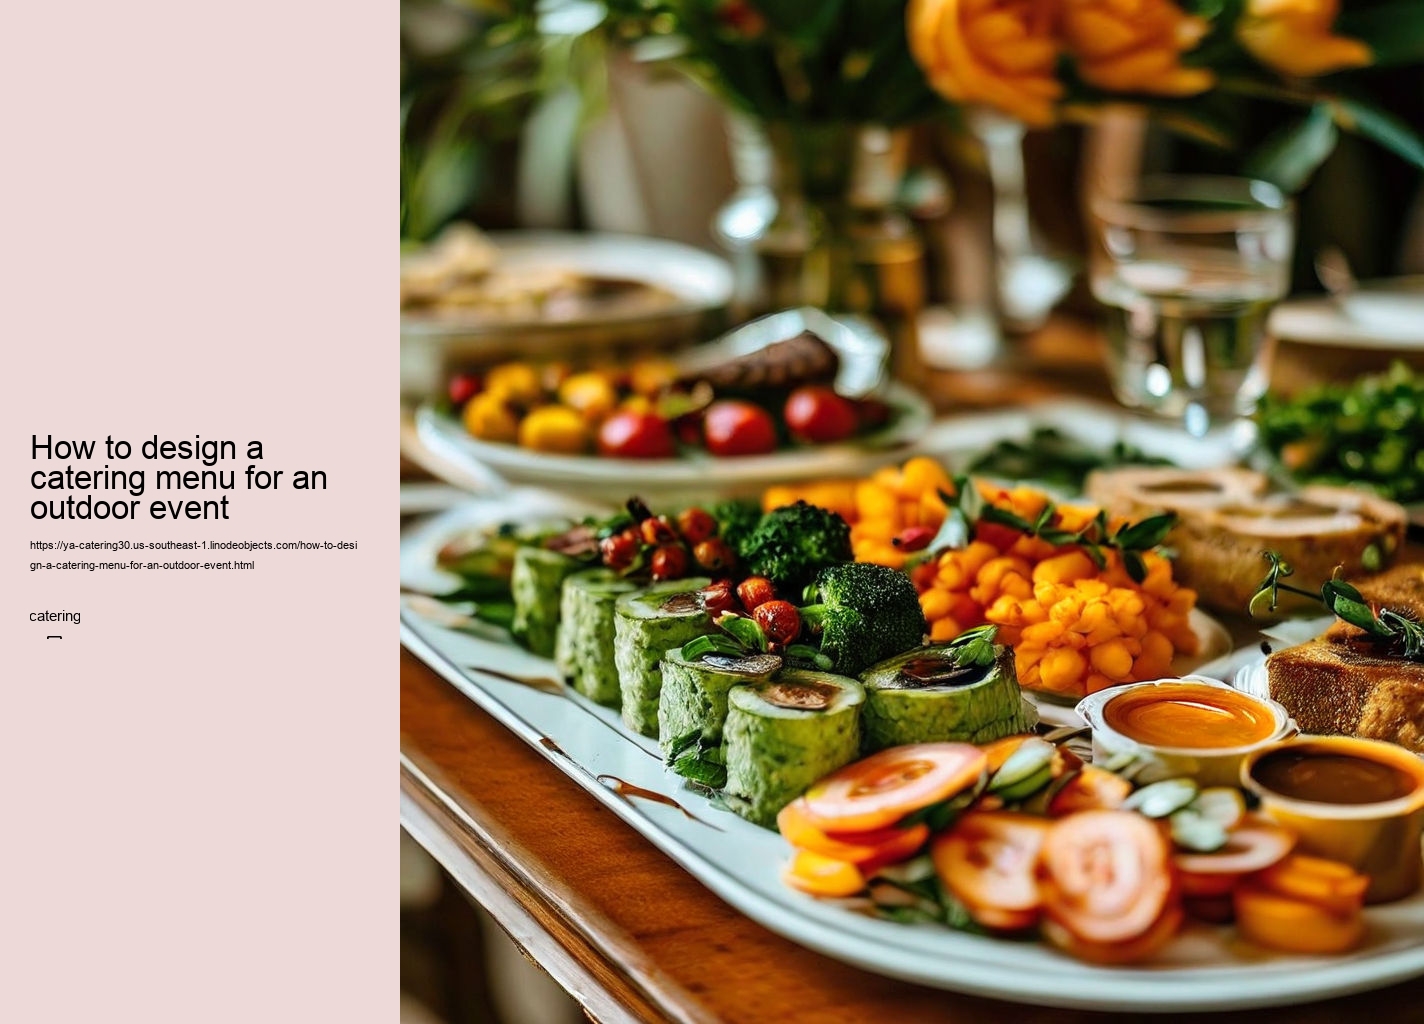 How to design a catering menu for an outdoor event